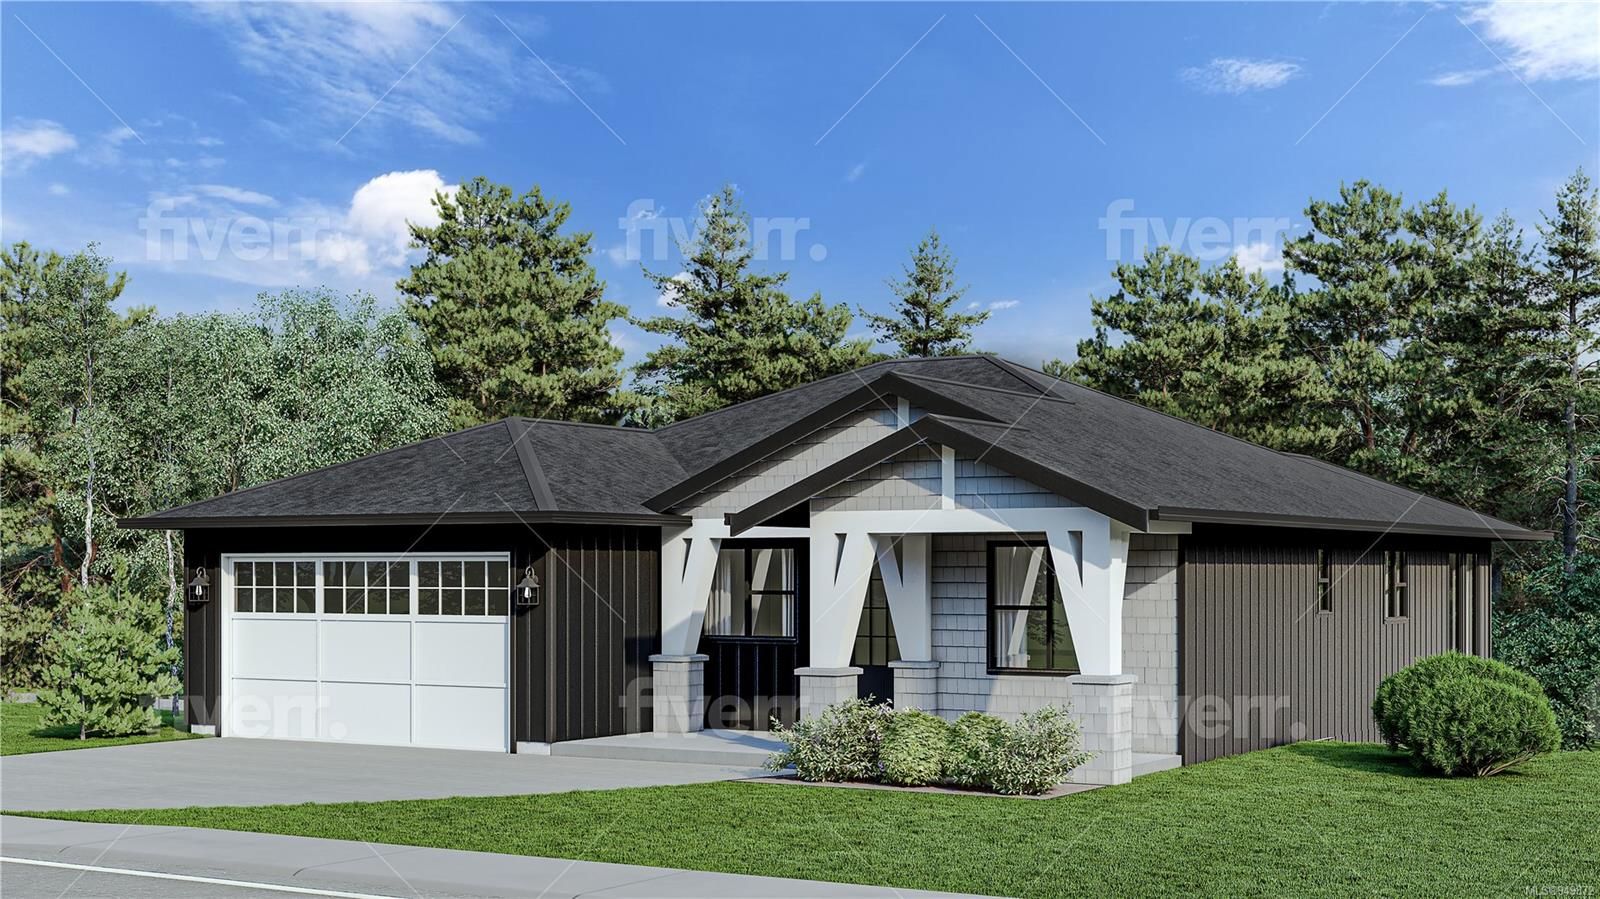 New property listed in La Olympic View, Langford